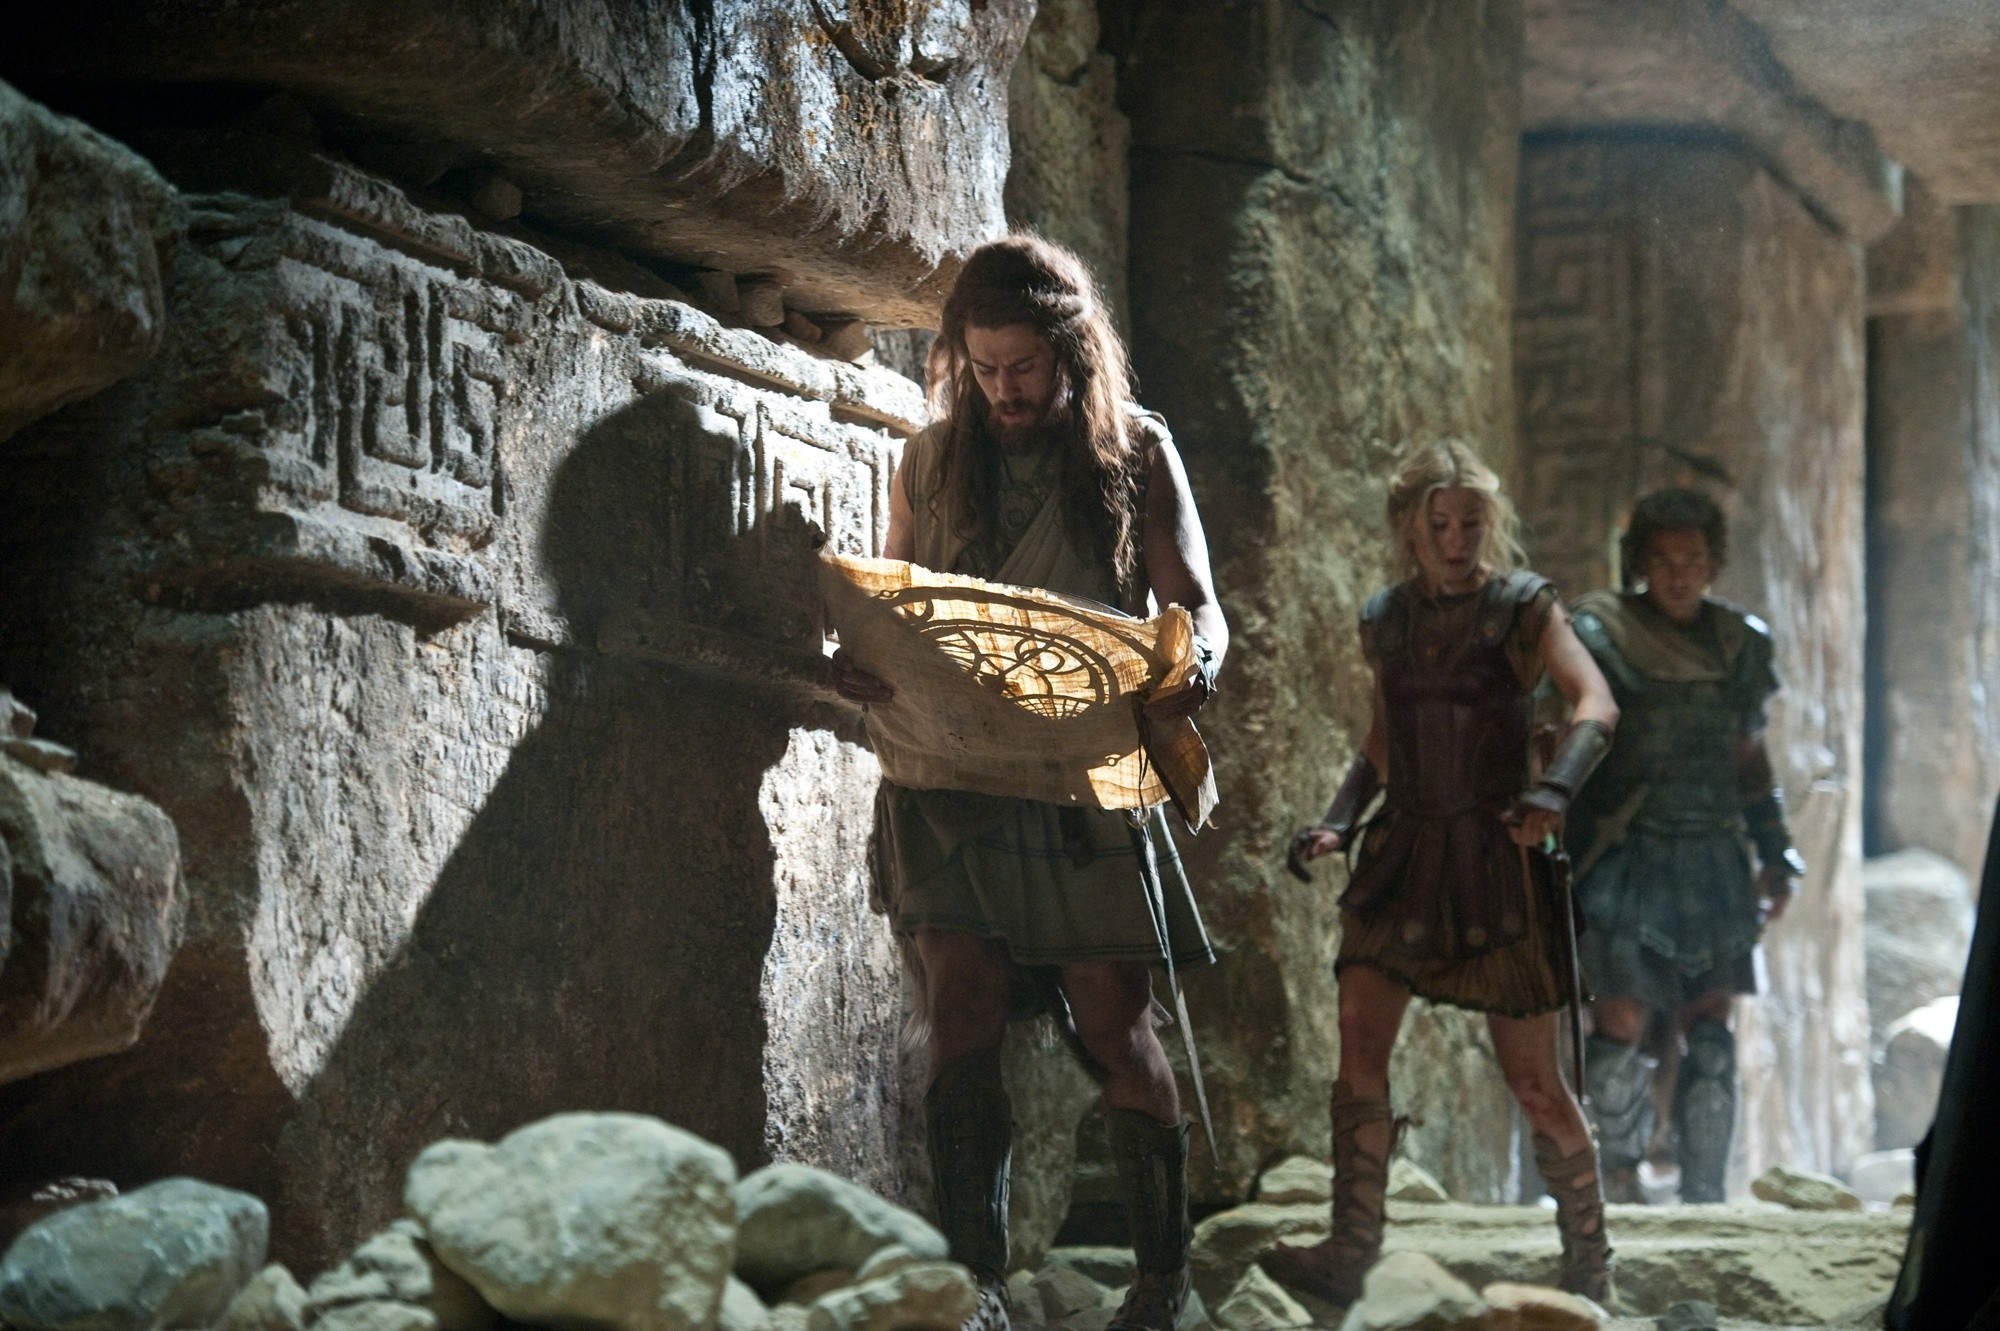 Toby Kebbell, Rosamund Pike and Sam Worthington in Warner Bros. Pictures' Wrath of the Titans (2012). Photo credit by Jay Maidment.